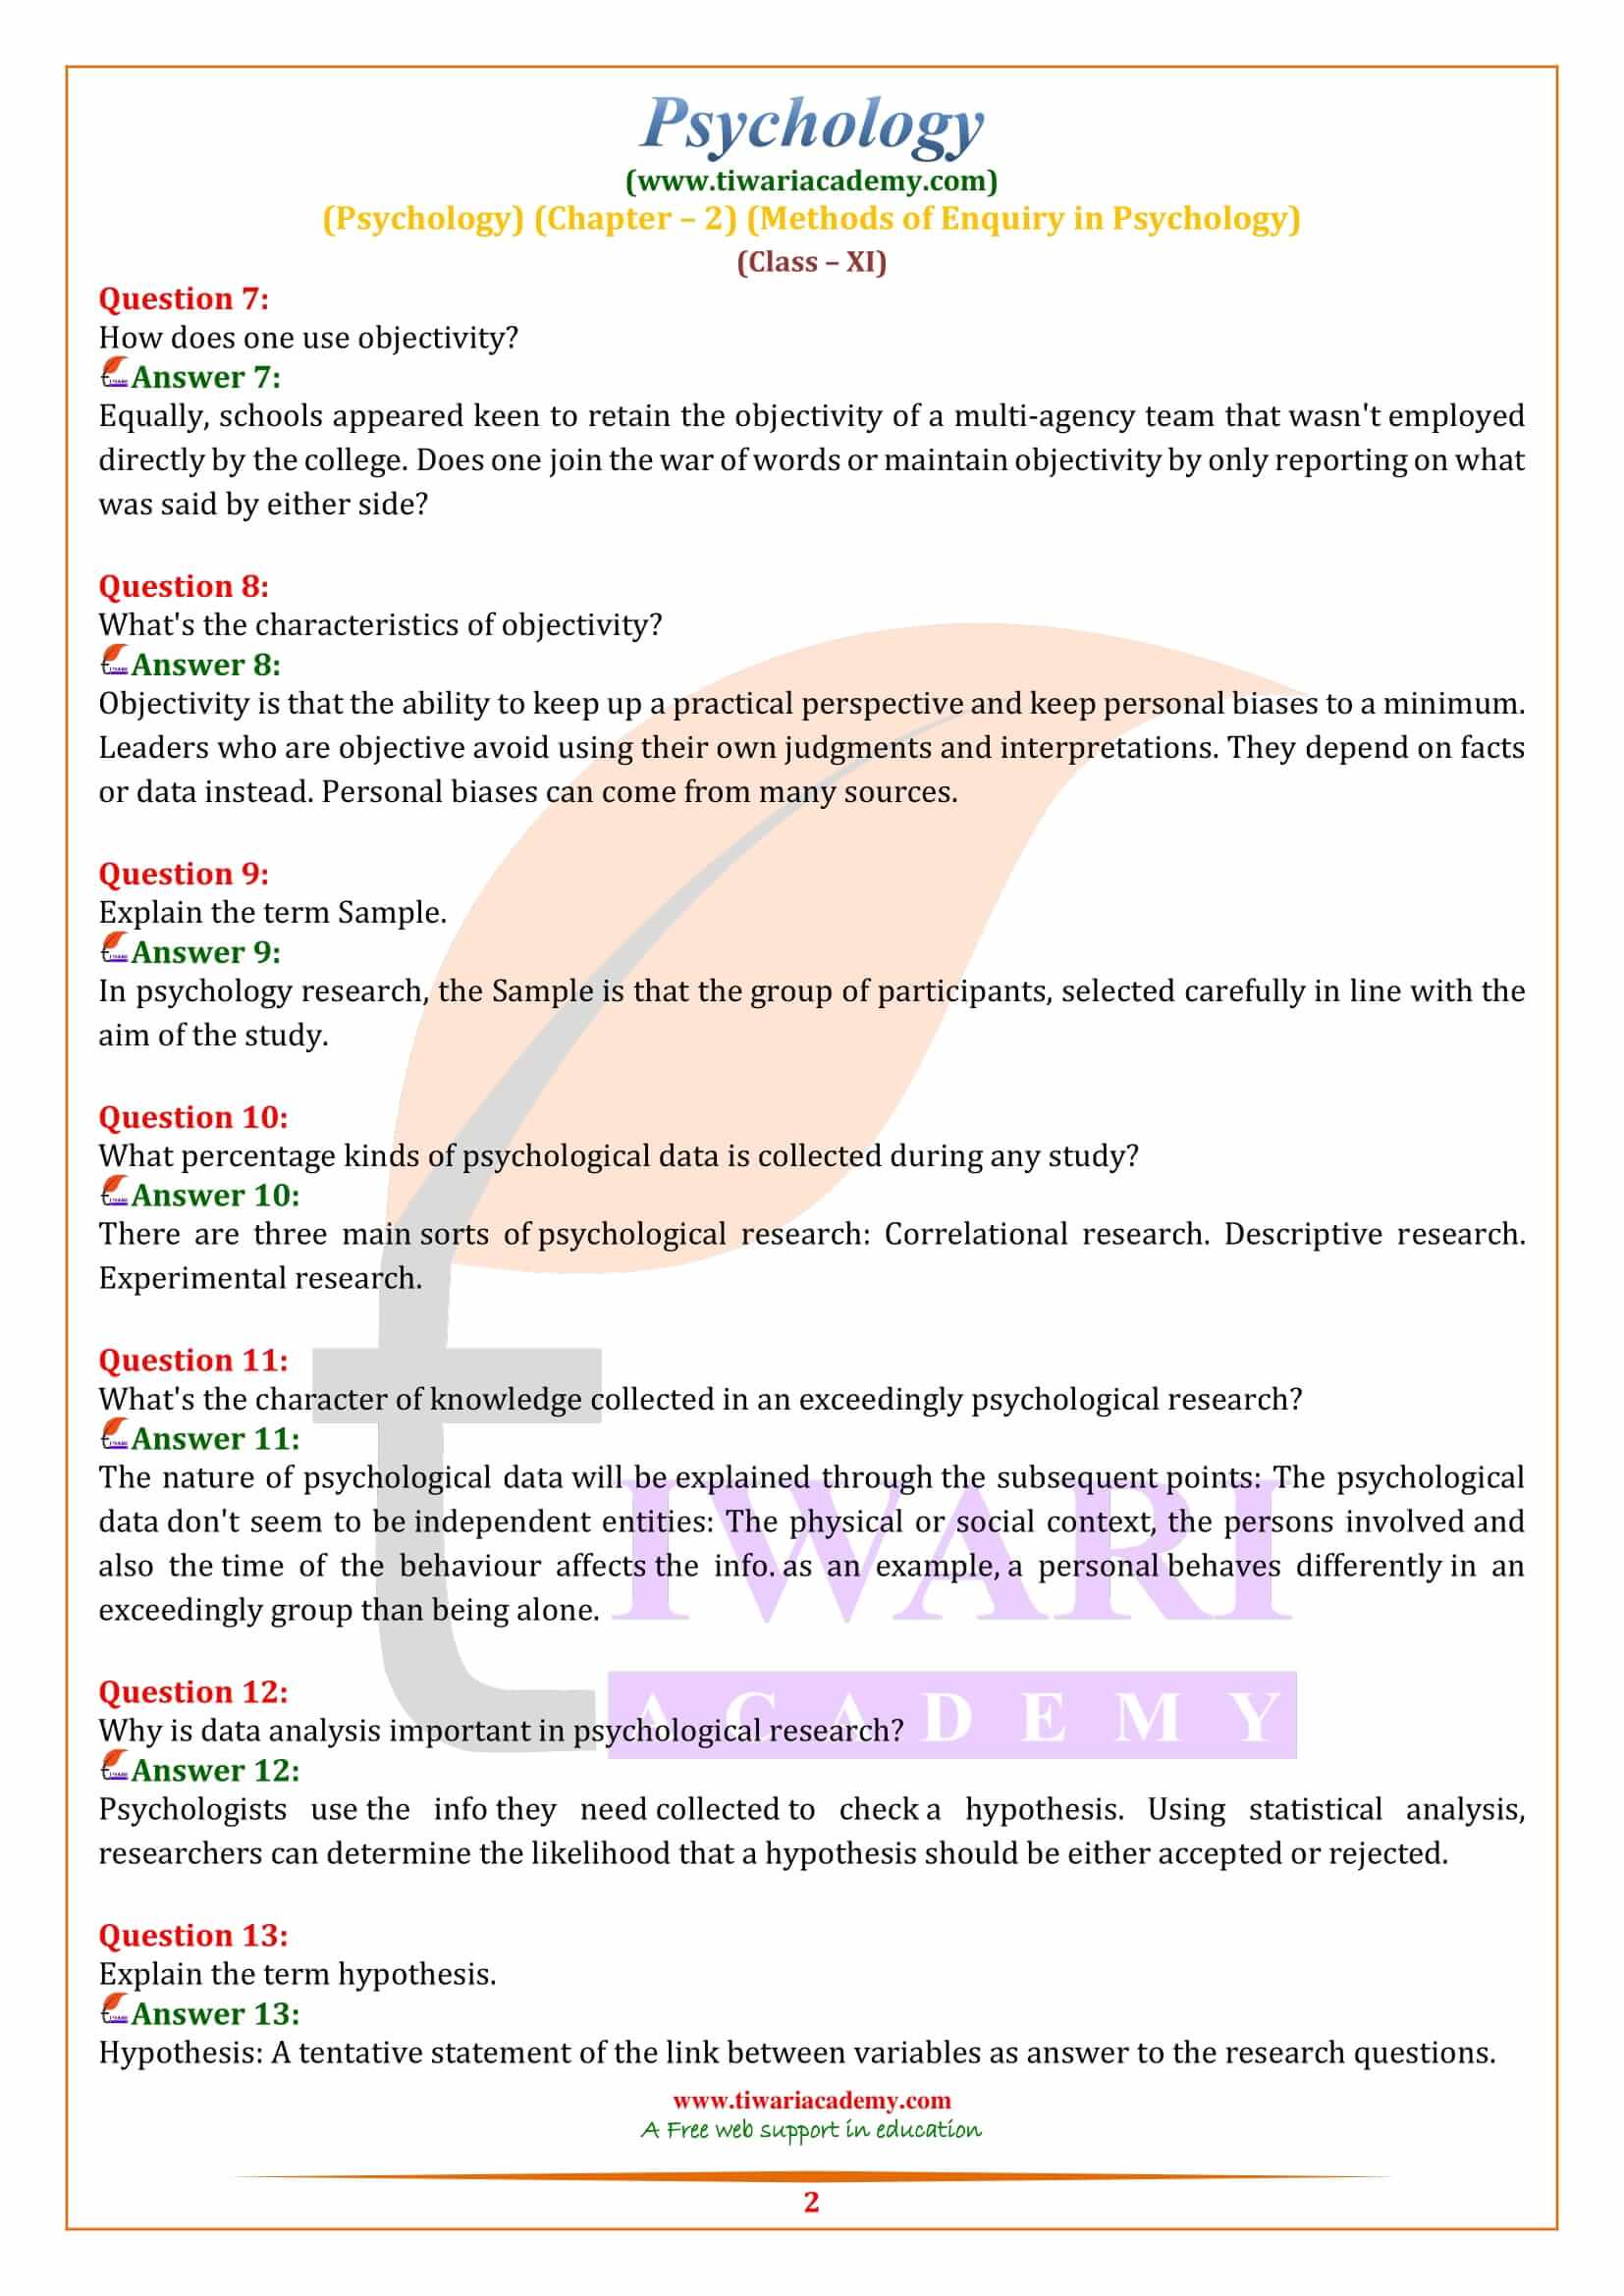 Class 11 Psychology Chapter 2 Revision Questions